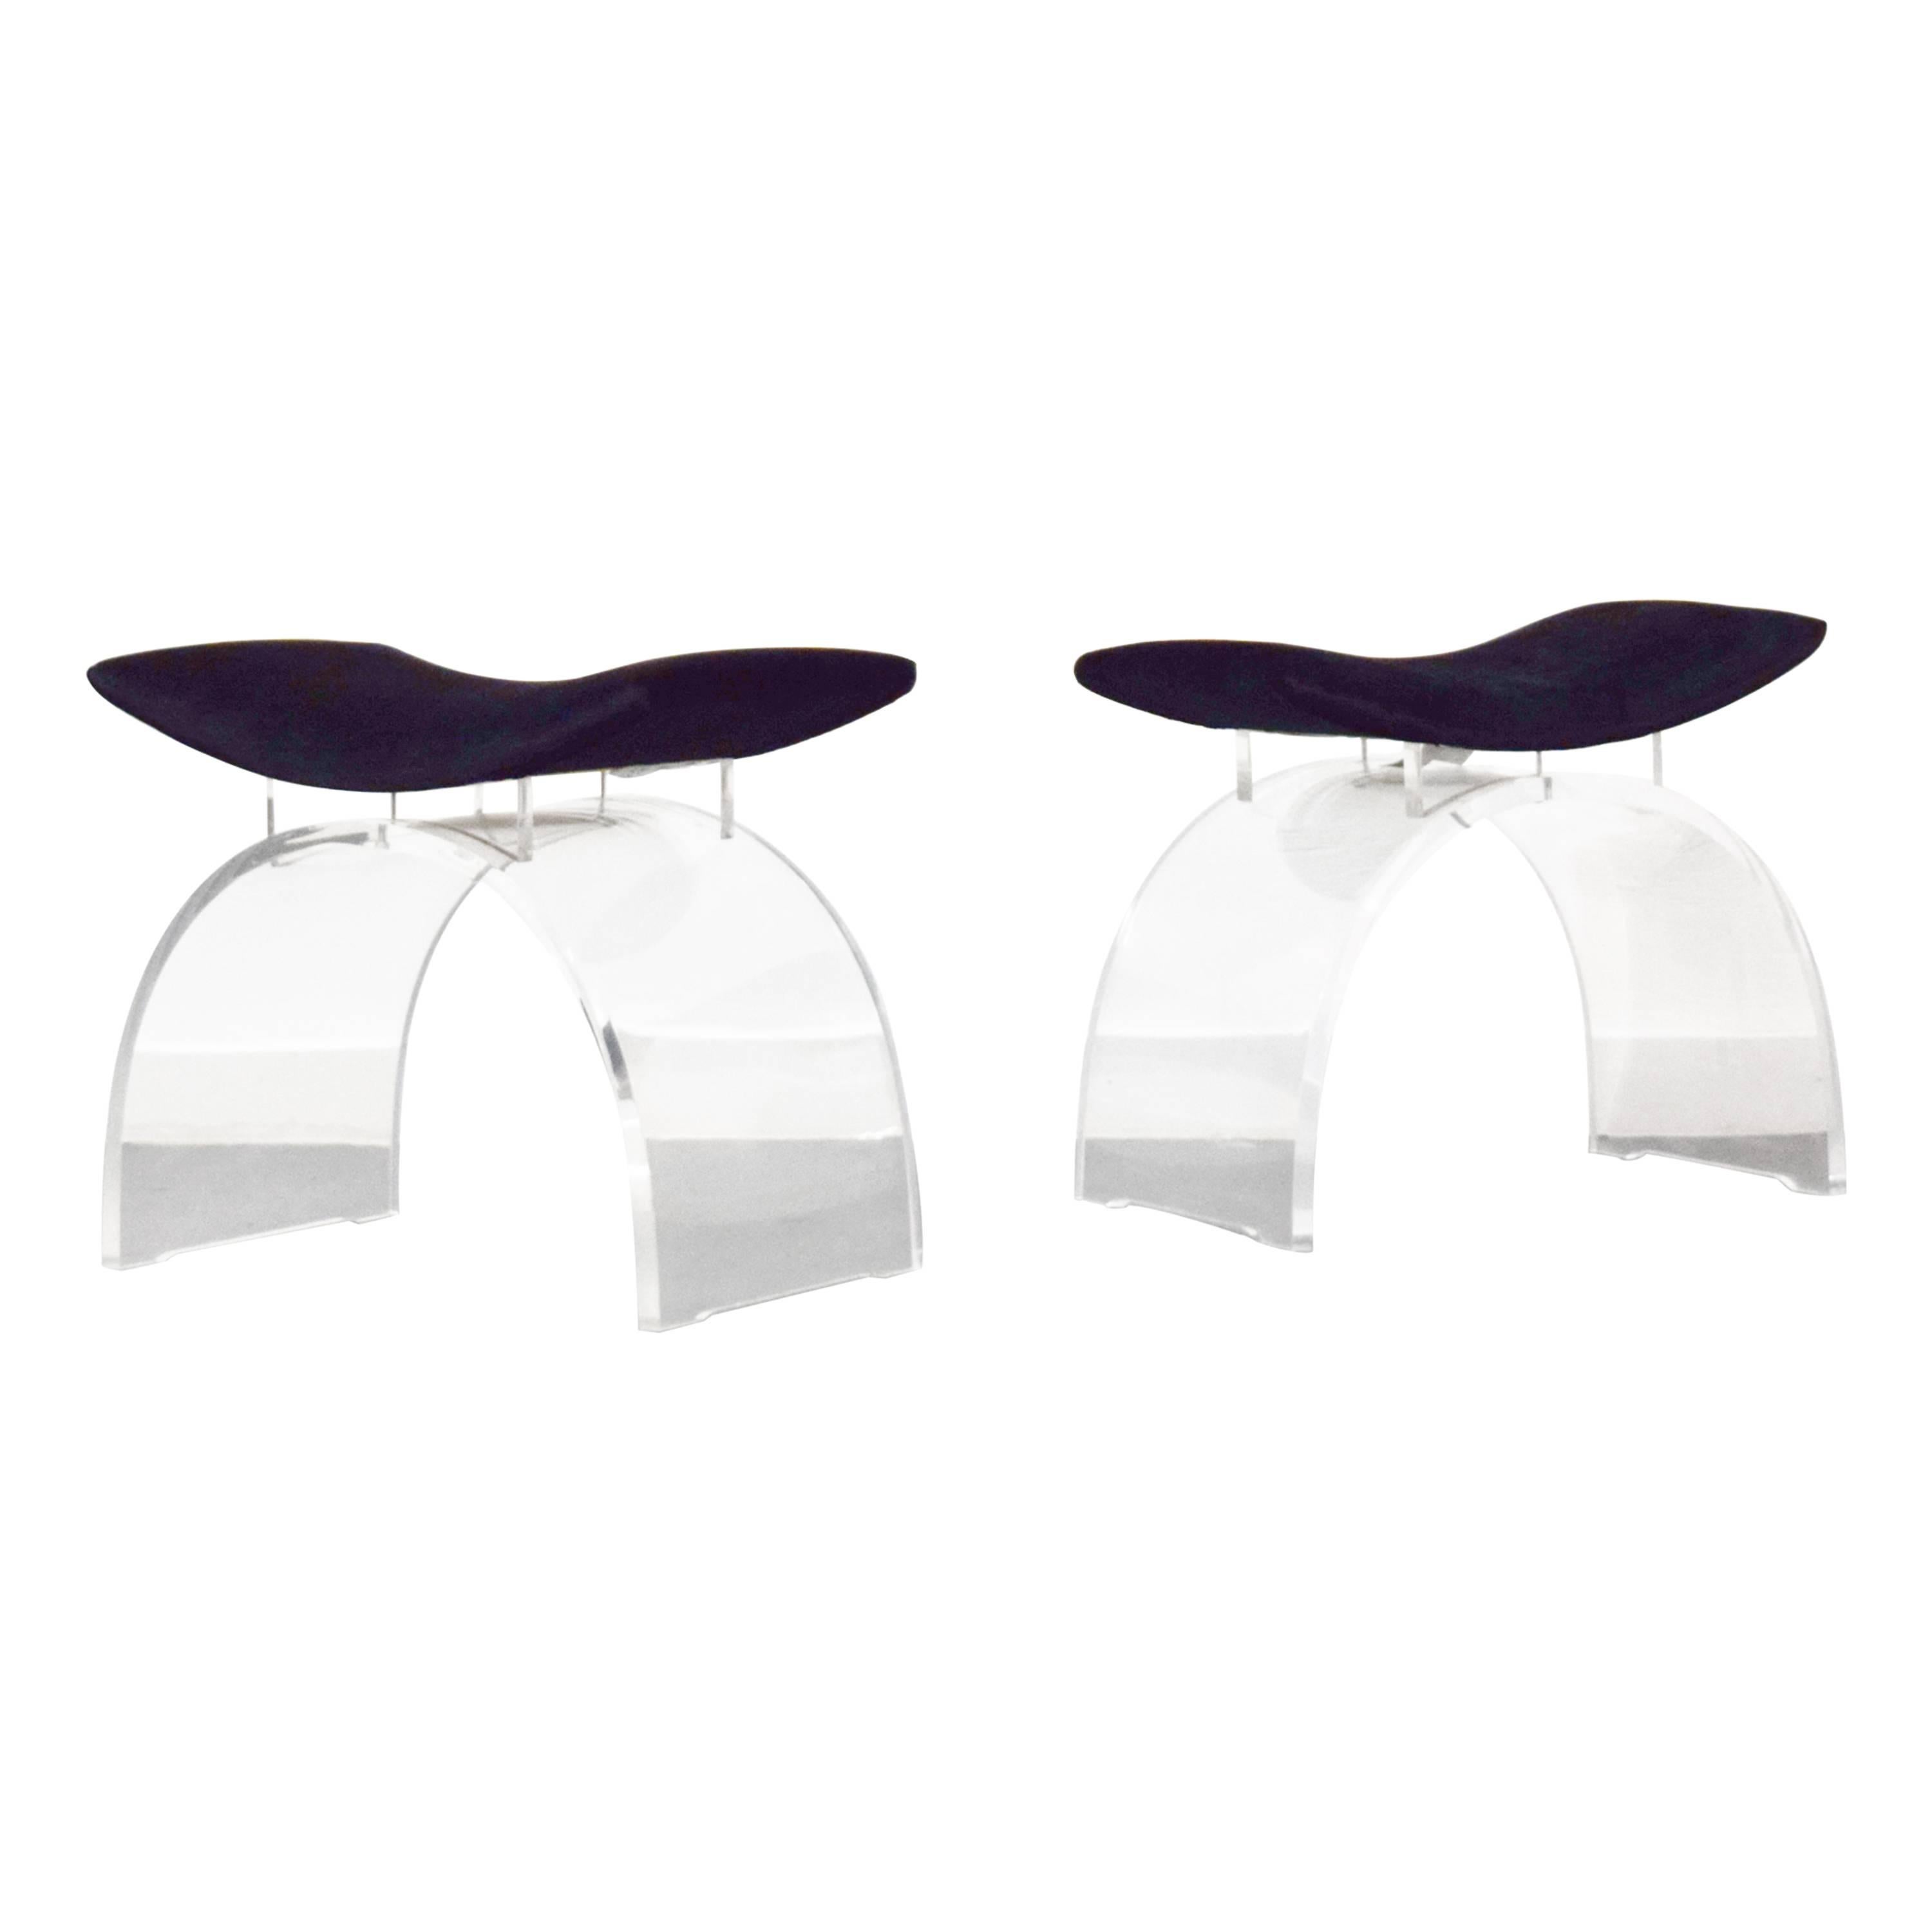  Pair of Curved Lucite Stools